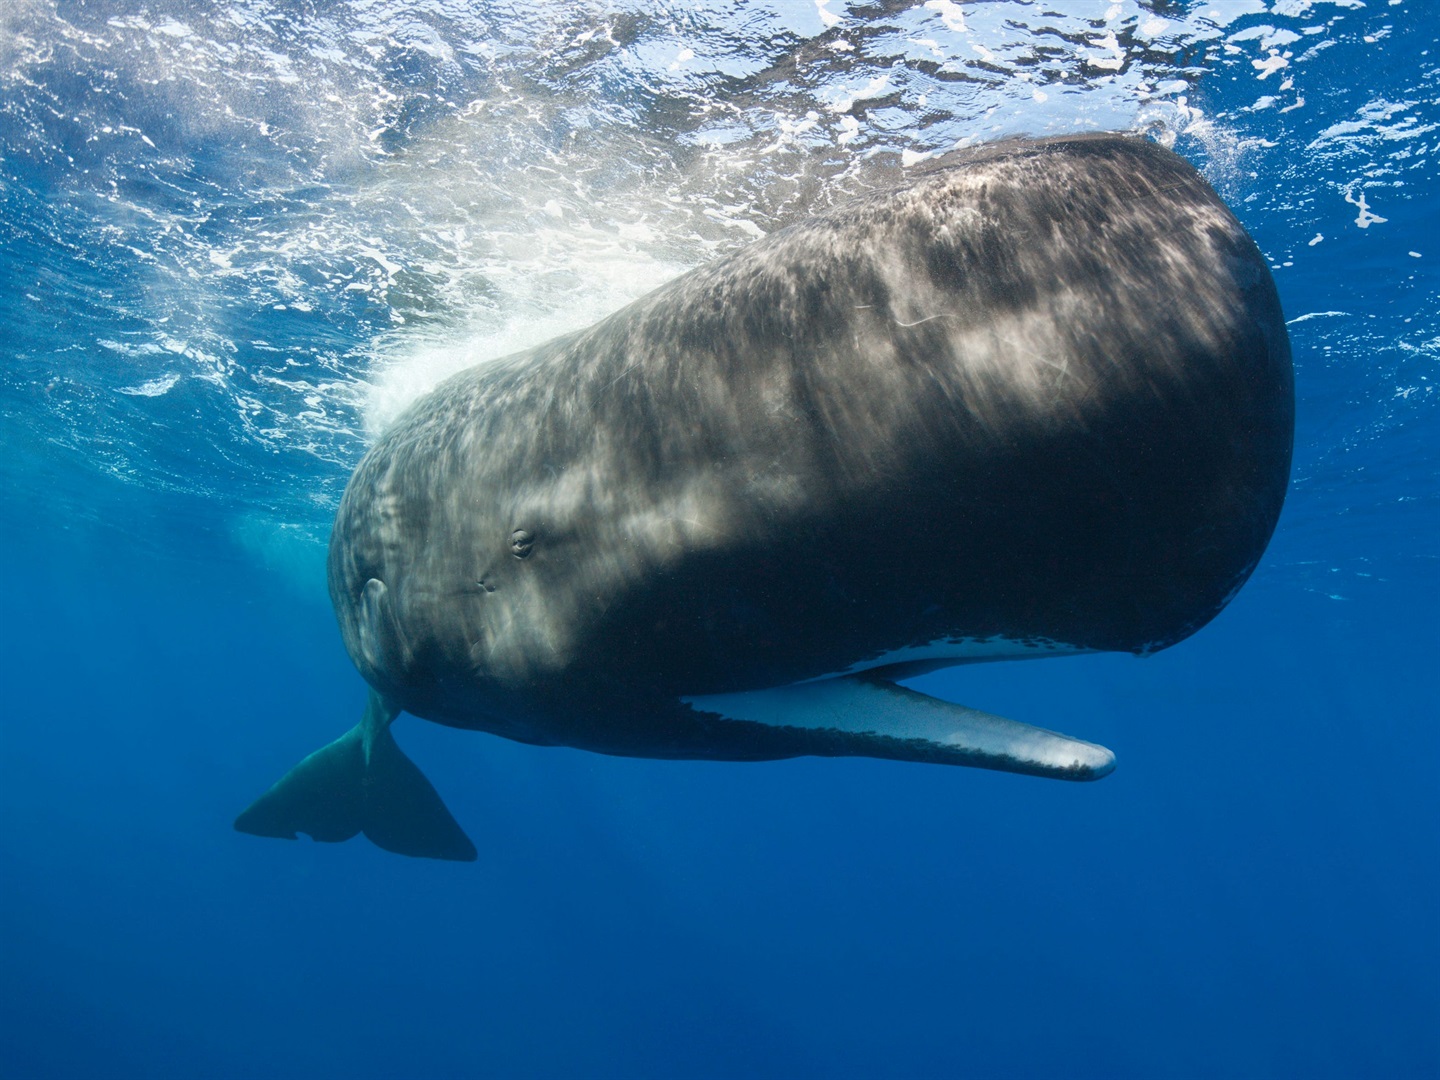 Sperm whales grow up to 18 meters long. (Reinhard Dirscherl/Getty Images).